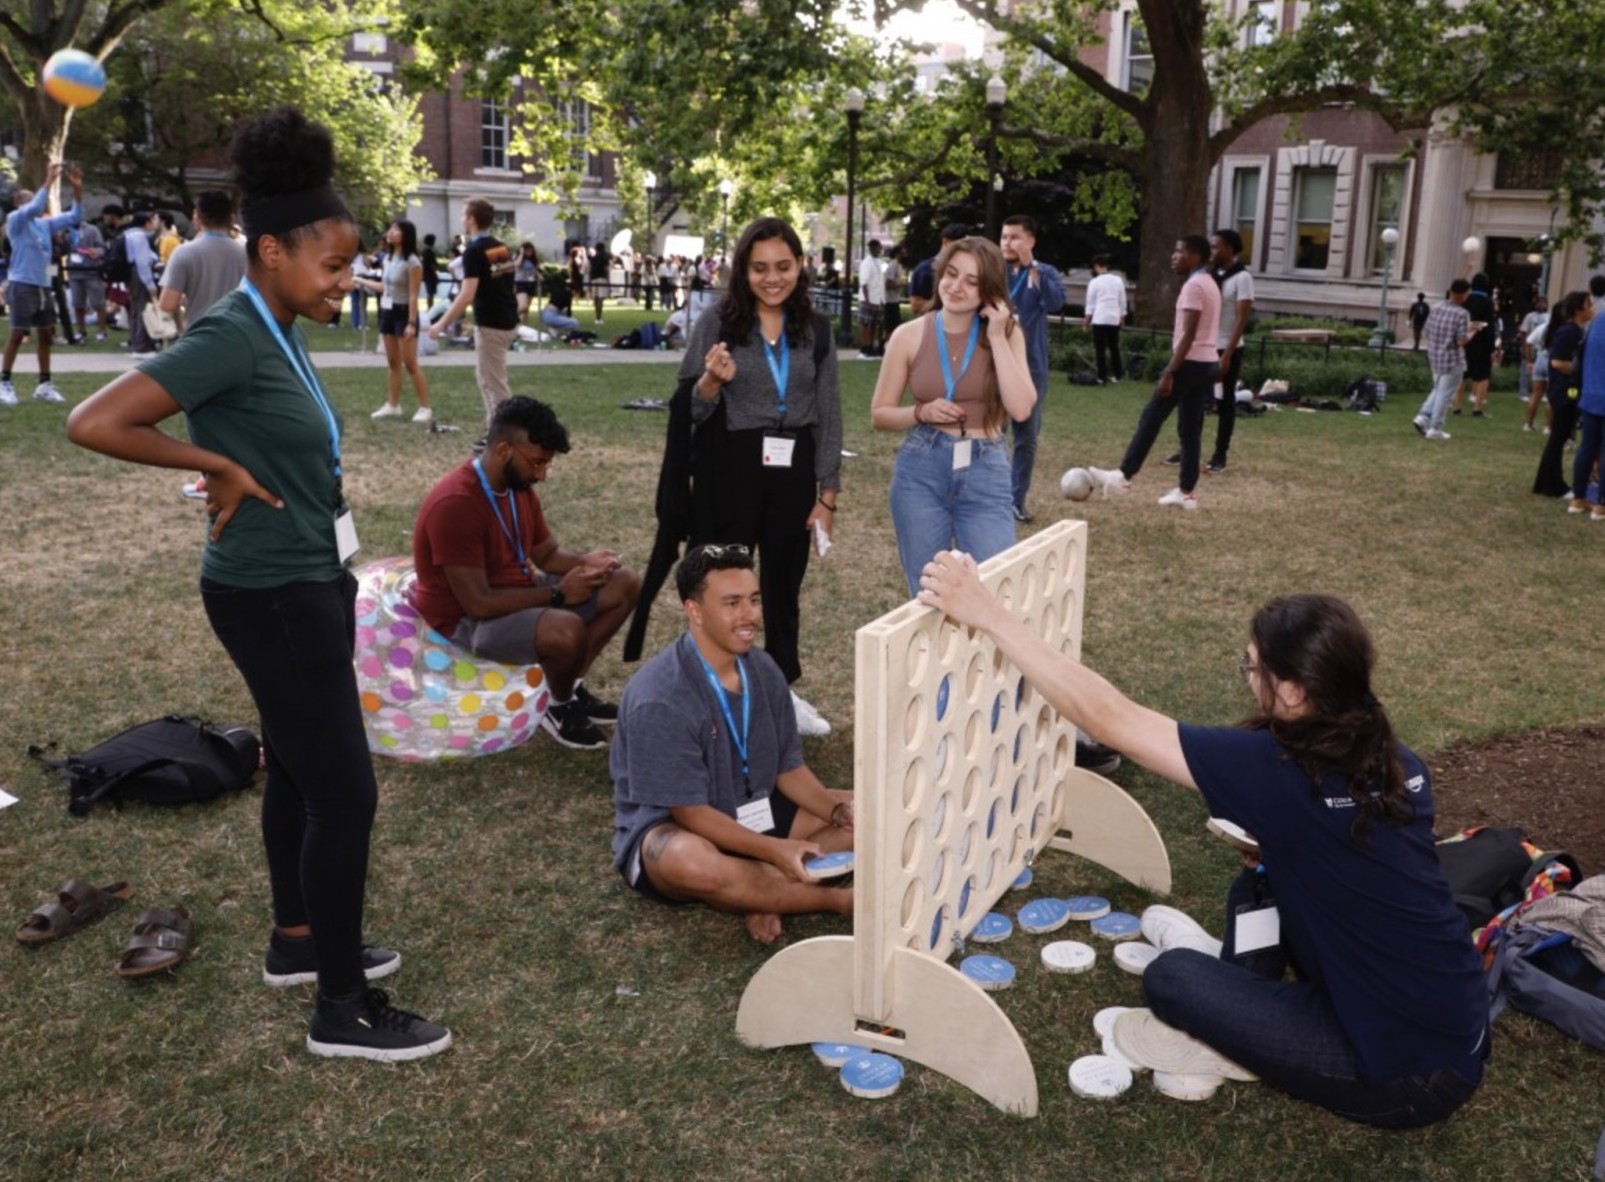 Student in green shirt stands over two students playing a giant Connect Four game on the grass